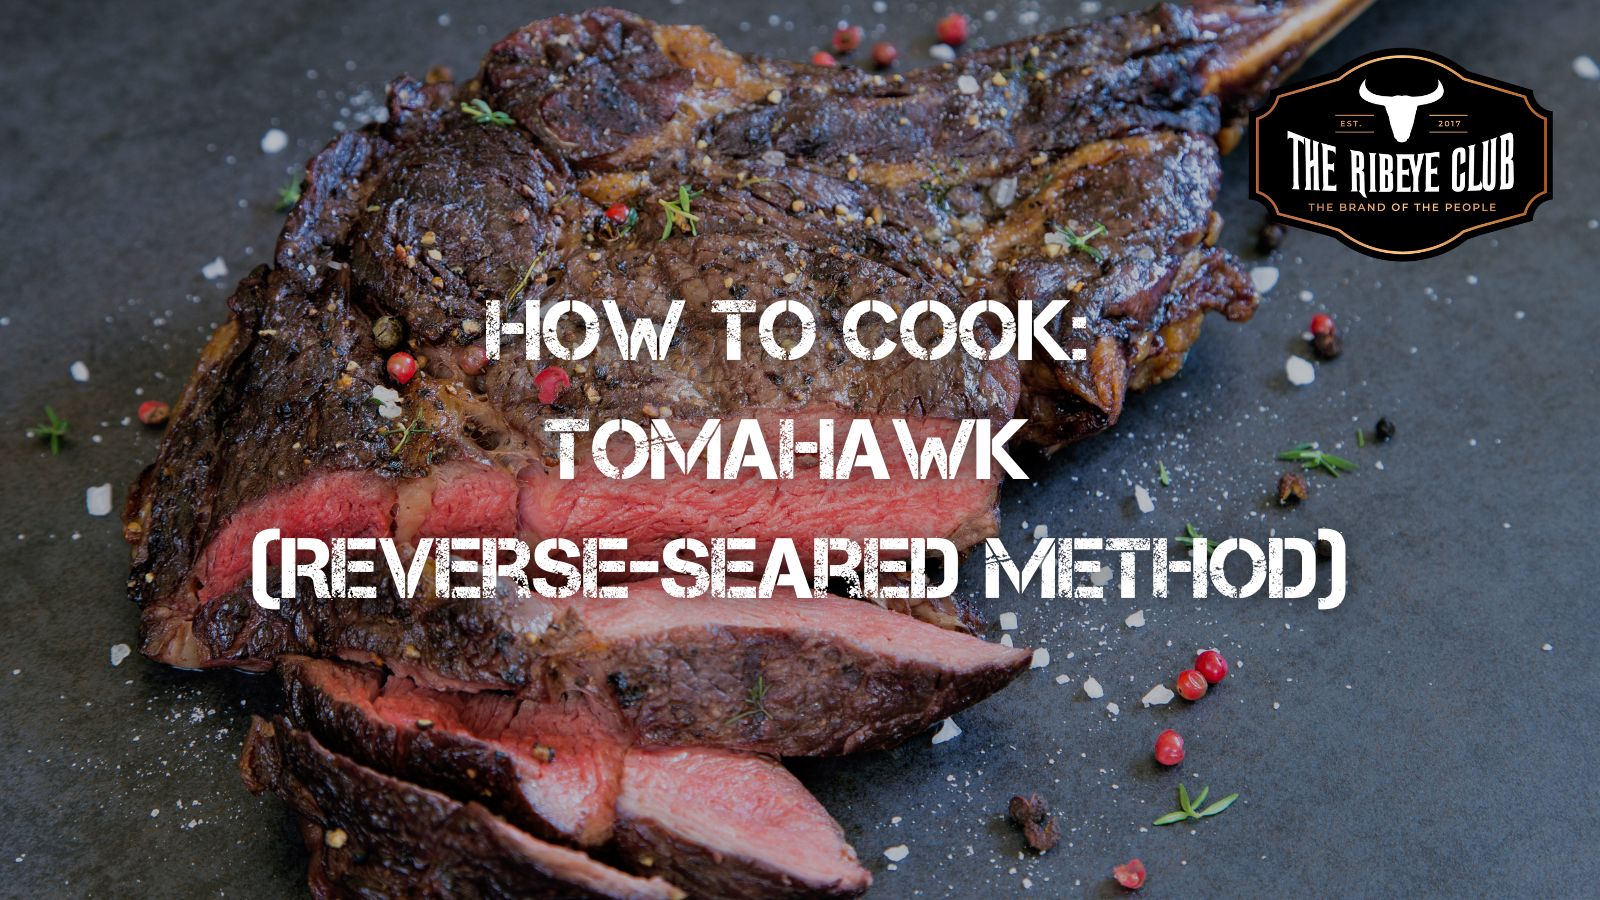 How to Cook: Tomahawk (Reverse-seared method)